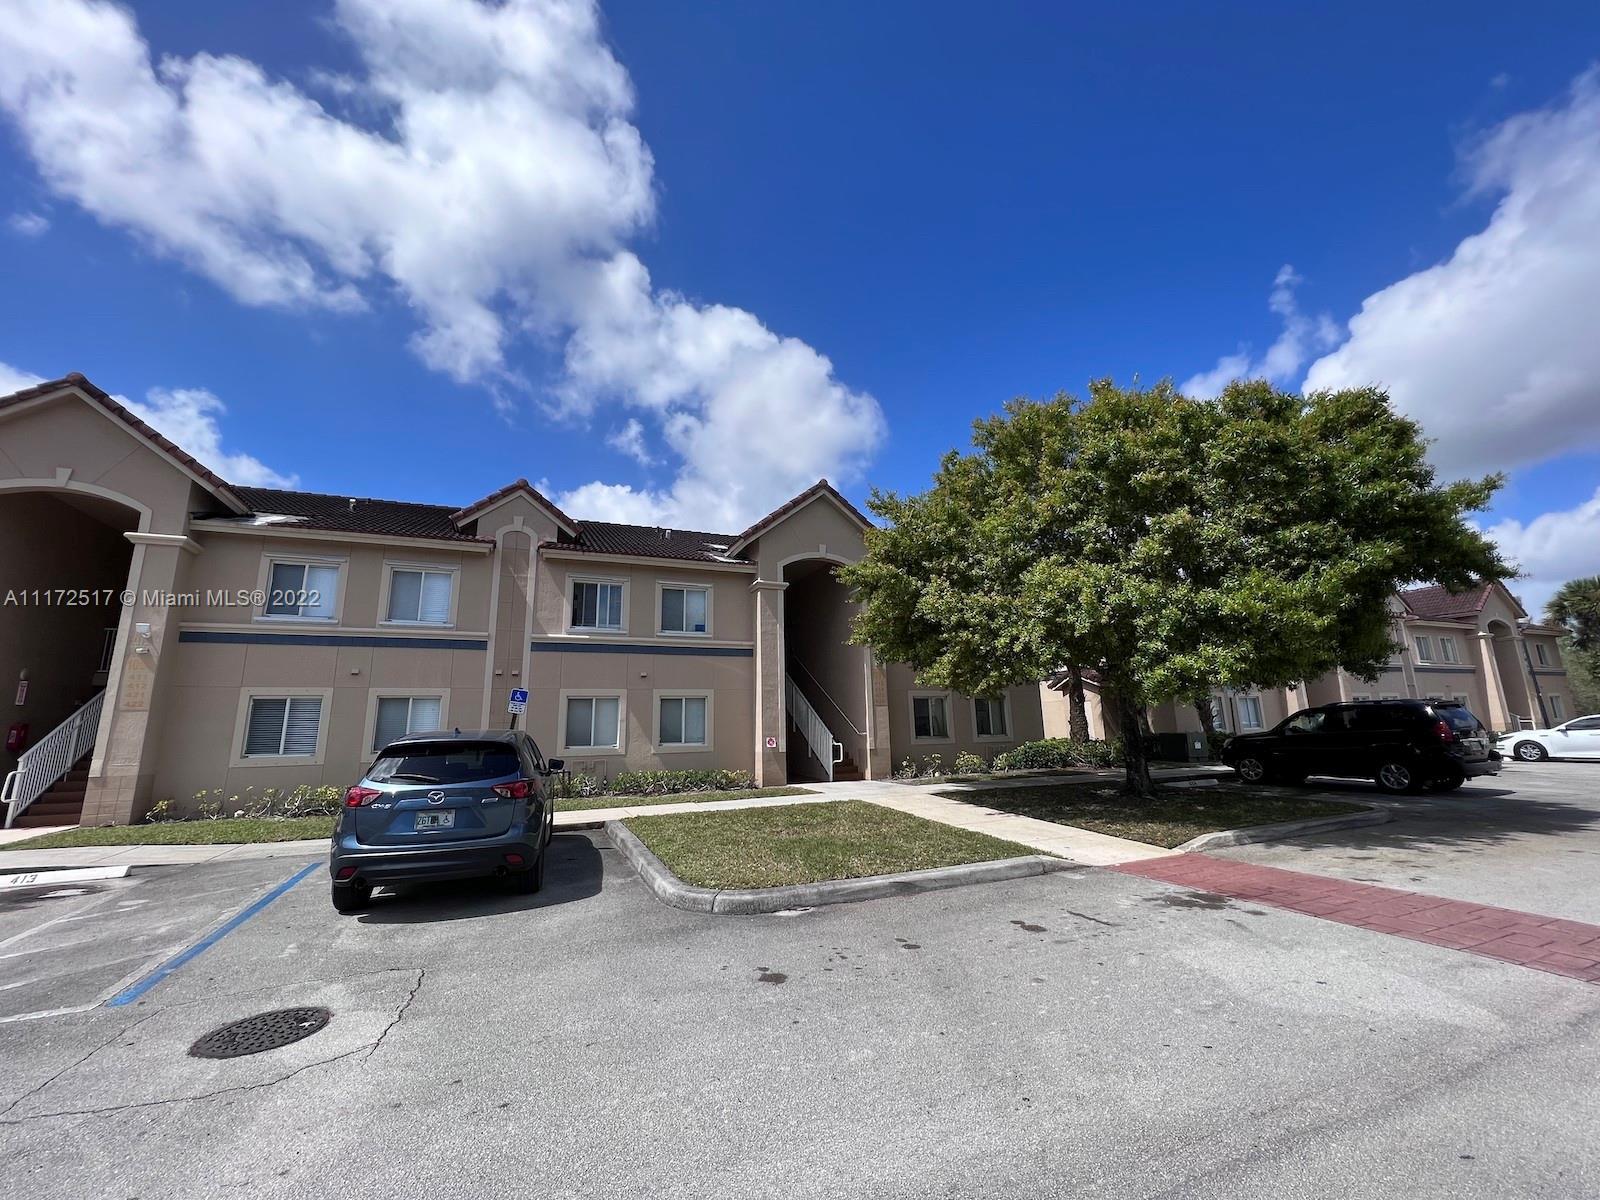 For Sale 3bed/3bath condo in West Palm Beach. First floor entry, tile and carpet floors, centra; AC,